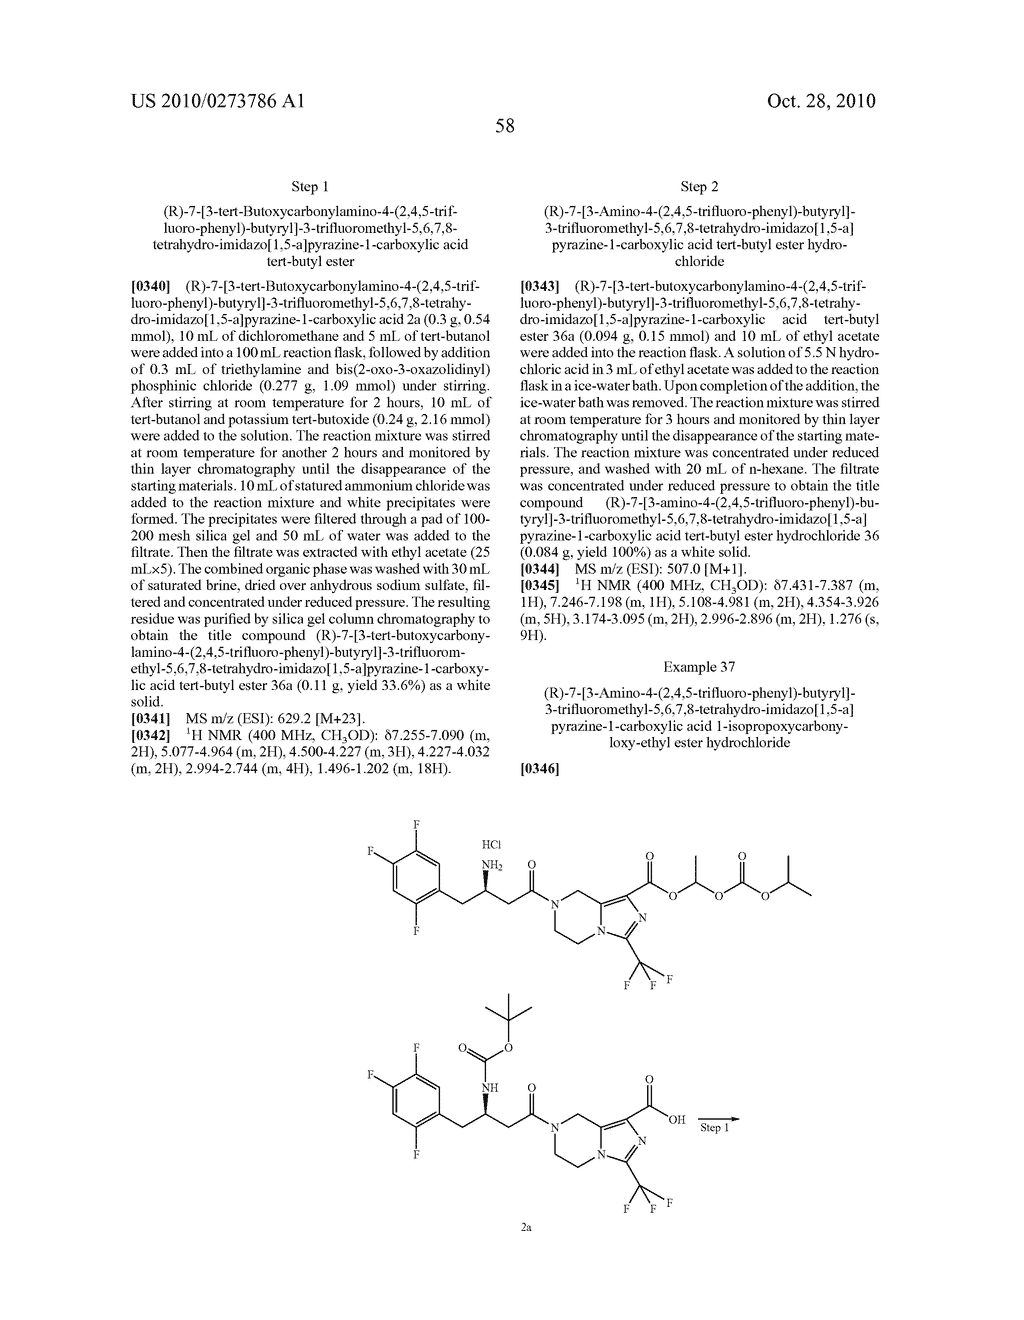 TETRAHYDRO-IMIDAZ0[1,5-A]PYRAZINE DERIVATIVES, PREPARATION PROCESS AND MEDICINAL USE THEREOF - diagram, schematic, and image 59